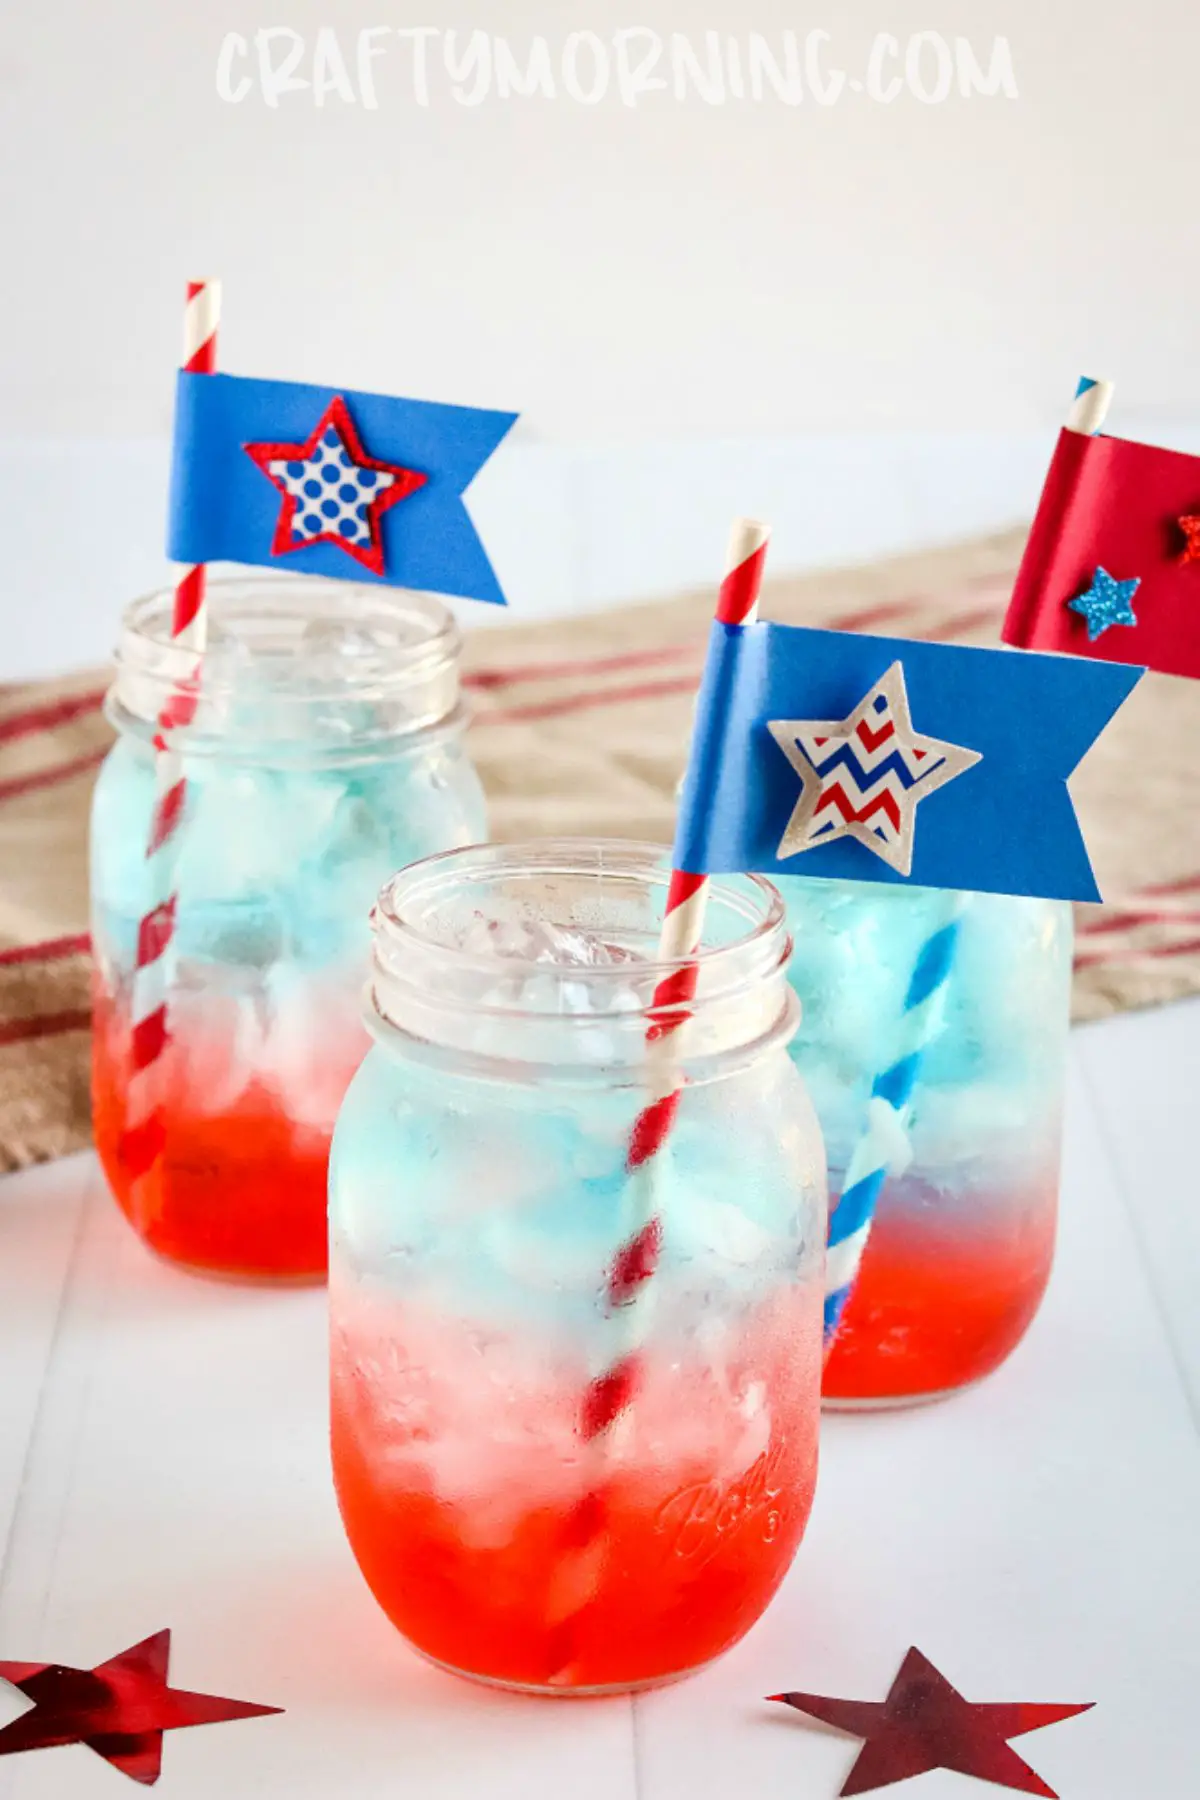 Make a red, white, and blue drink for the 4th of July this year